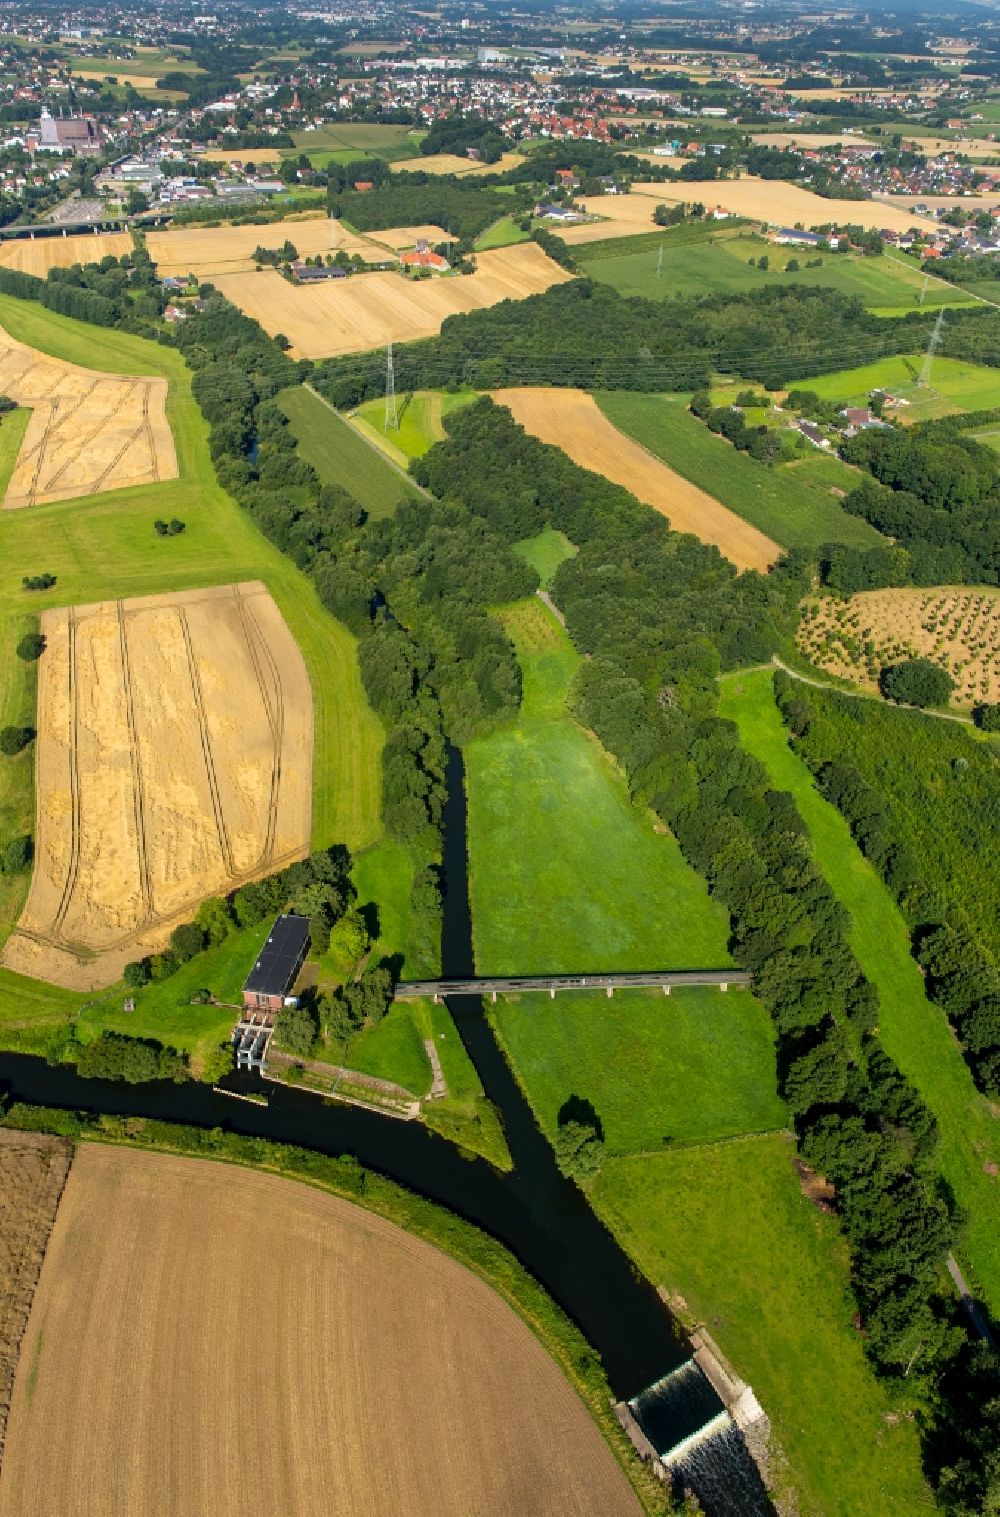 Kirchlengern from above - Meeting point of the rivers Else and Werre in the East of Kirchlengern in the state of North Rhine-Westphalia. The rivers mit in the district of Herford, surrounded by agricultural fields and forest